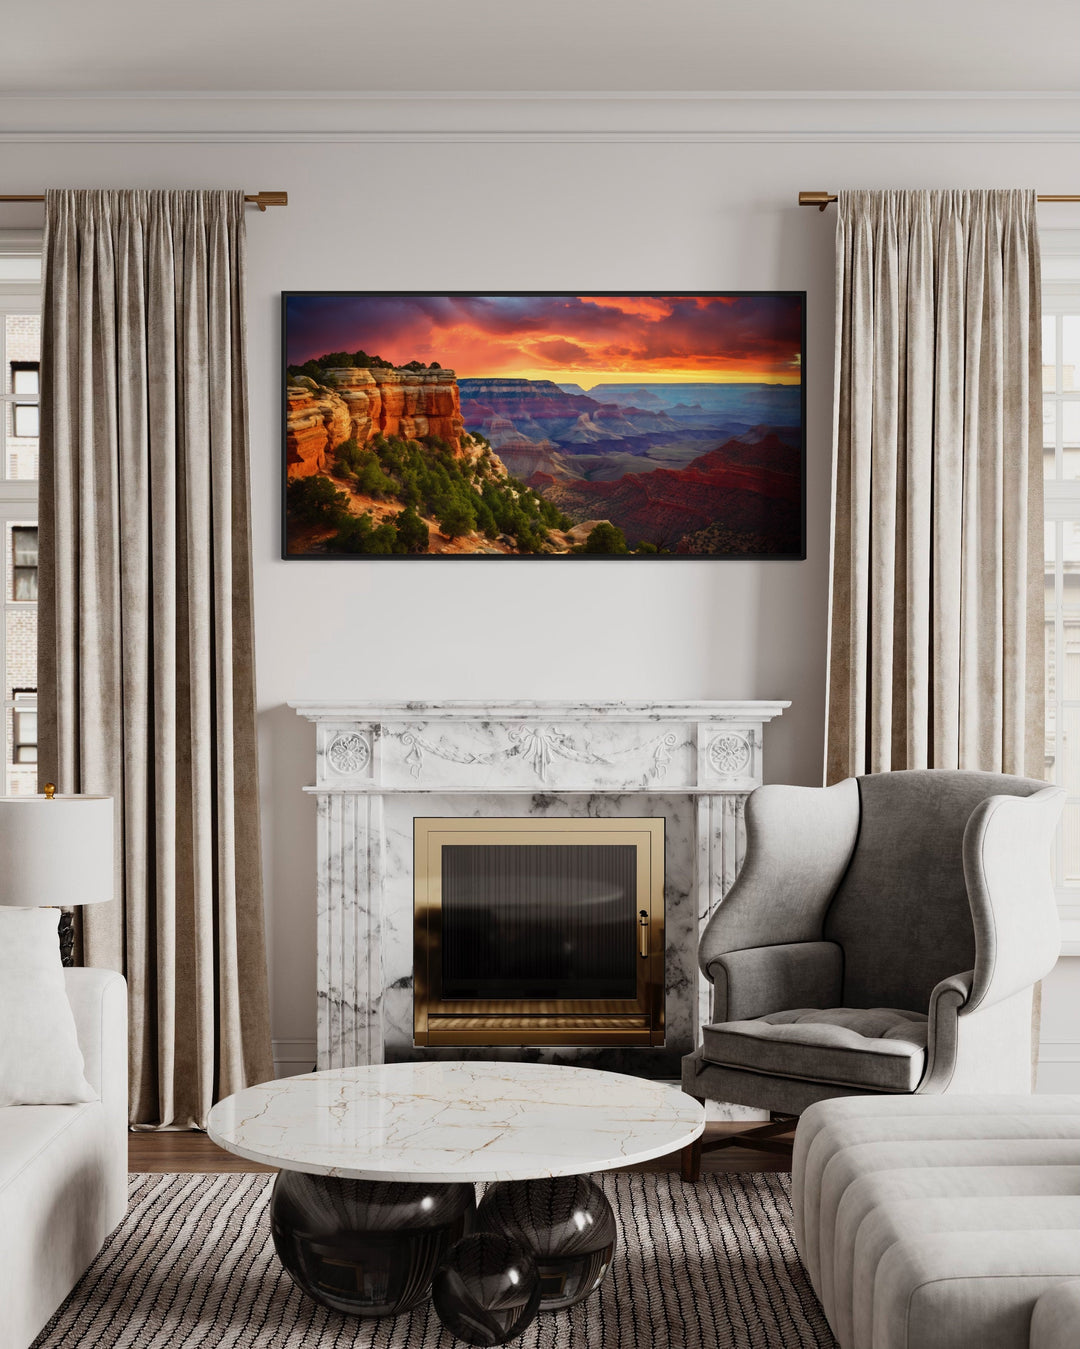 Grand Canyon Sunset Photo Framed Canvas Wall Art above fireplace